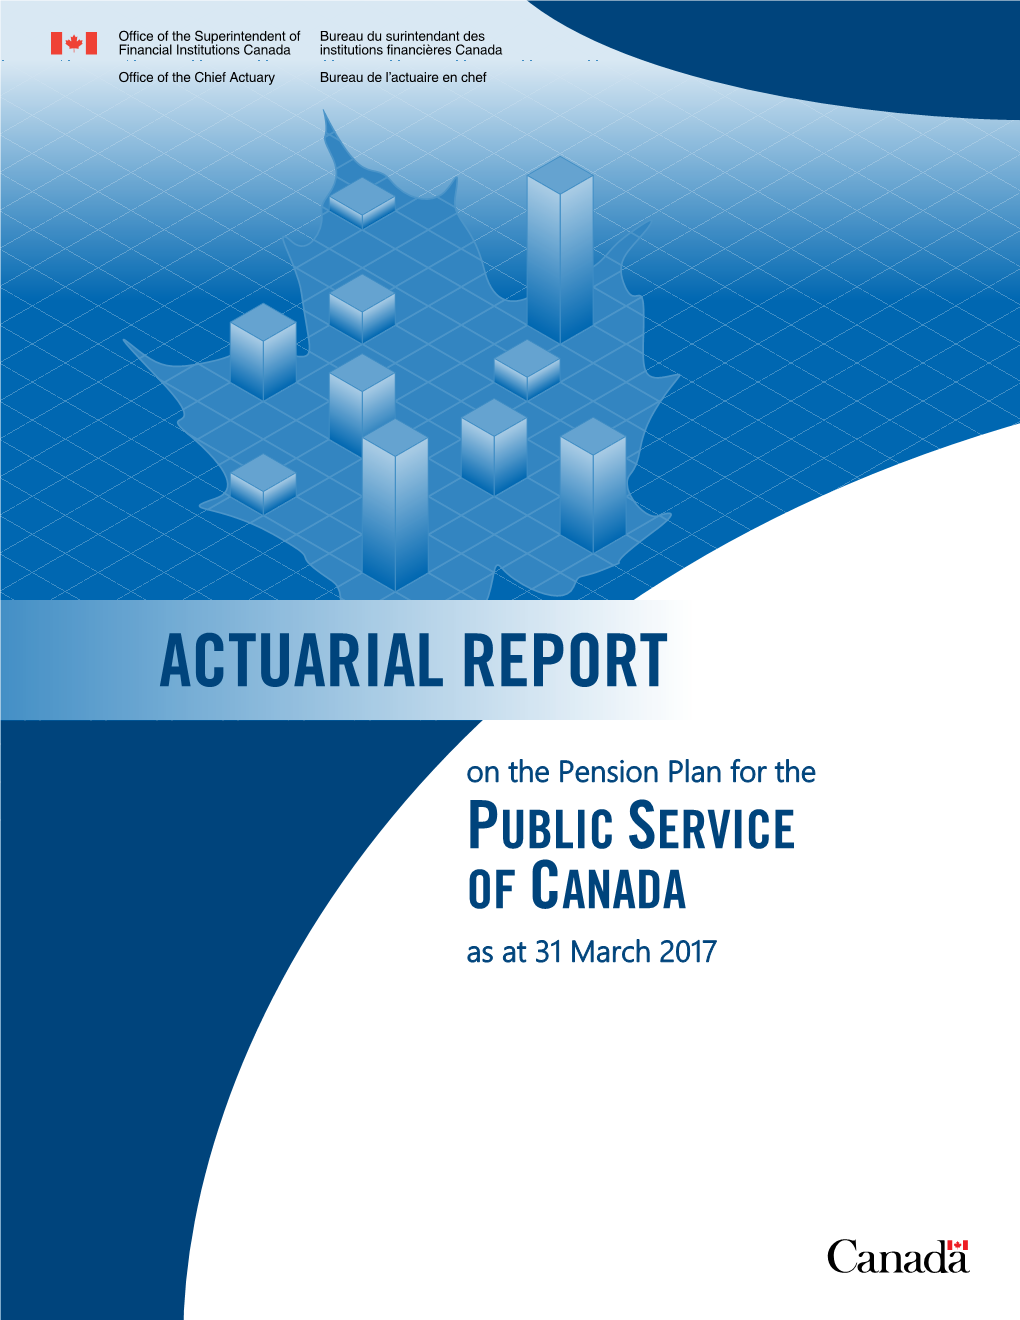 Actuarial Report on the Pension Plan for the Public Service of Canada (PSPP) Was Made Pursuant to the Public Pensions Reporting Act (PPRA)